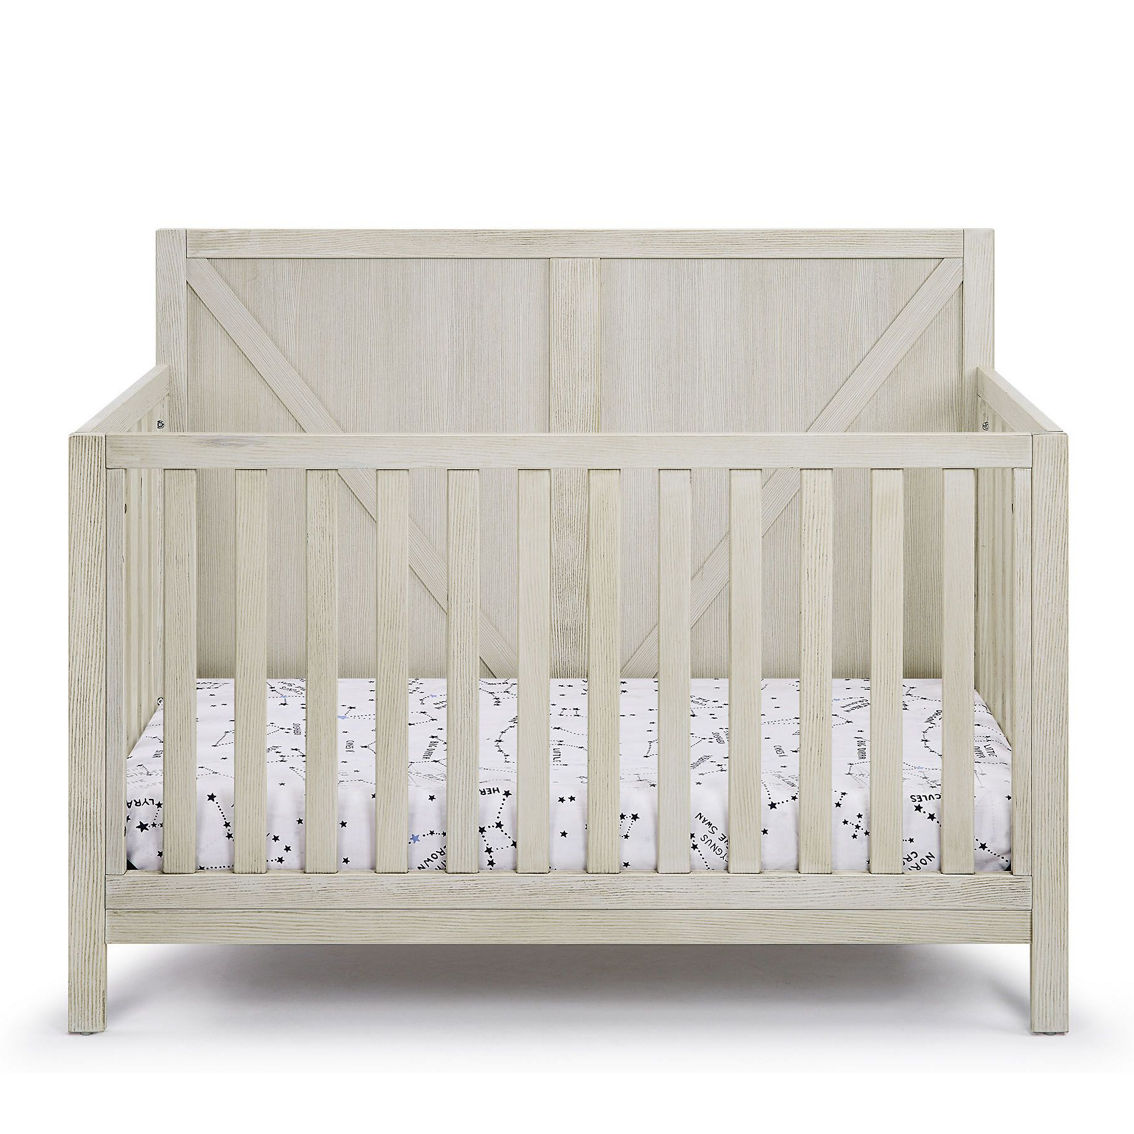 Suite Bebe Barnside 4-in-1 Convertible Crib Washed Gray - Image 2 of 5